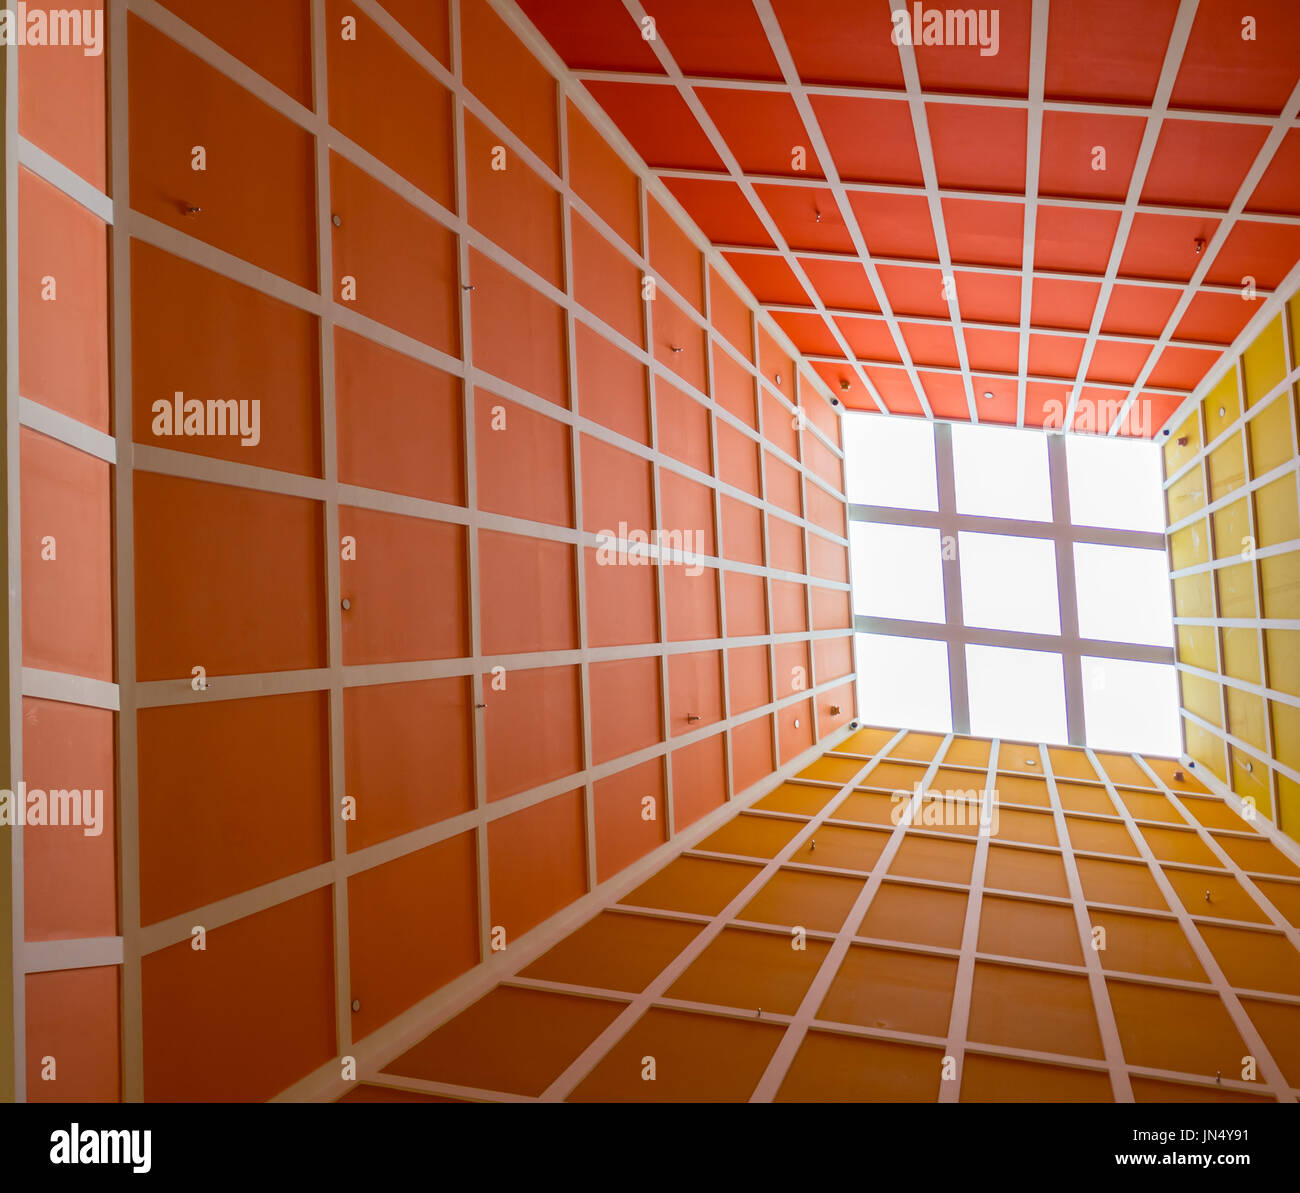 interior architectural design of squares and lattice lines with skylight Stock Photo